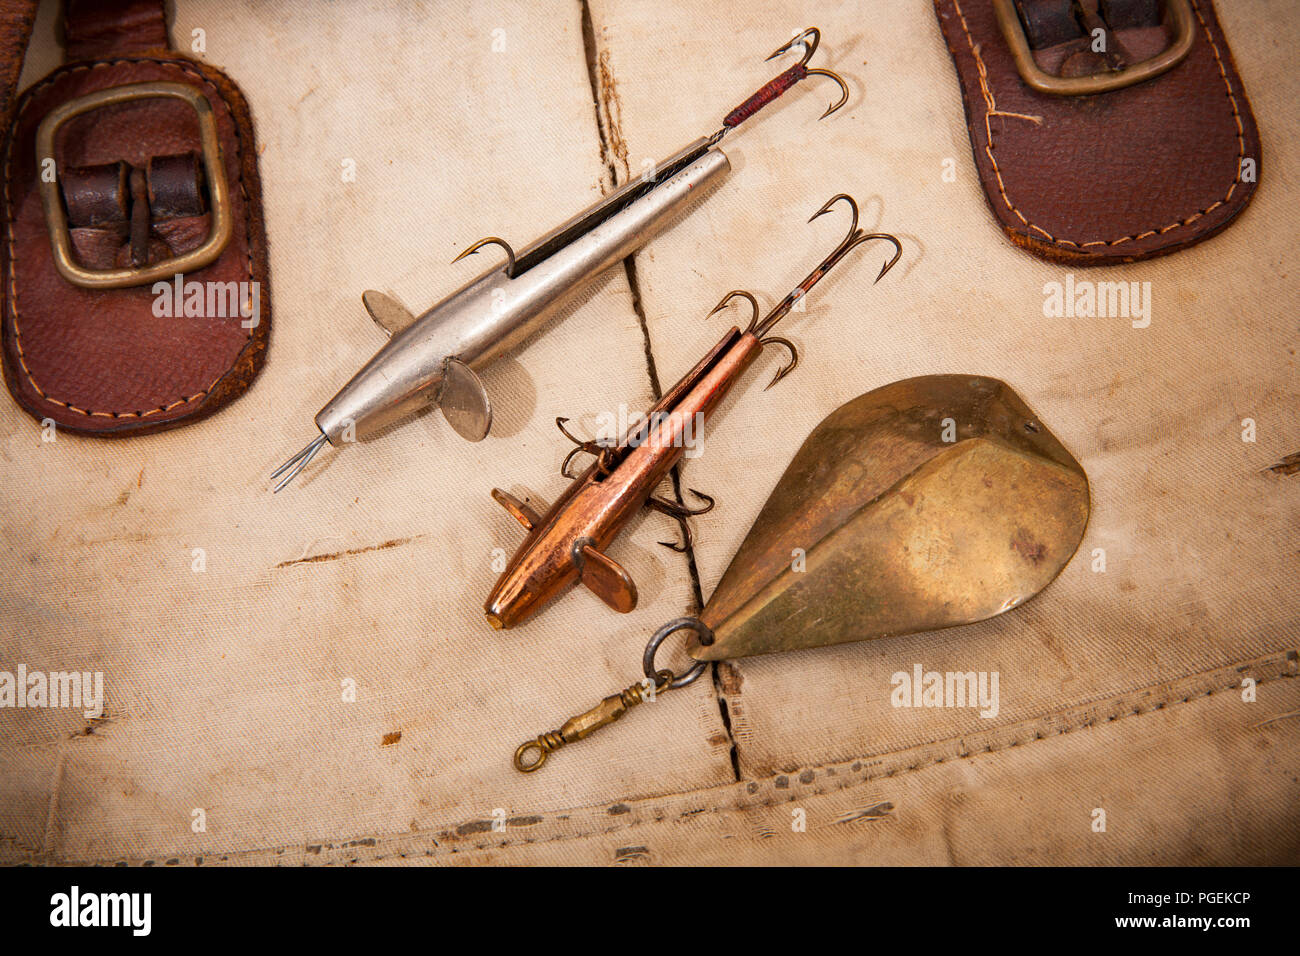 https://c8.alamy.com/comp/PGEKCP/two-old-metal-devon-minnow-lures-with-hooks-and-an-old-metal-fishing-spoon-lure-displayed-on-an-old-fishing-tackle-bag-from-a-collection-of-vintage-f-PGEKCP.jpg